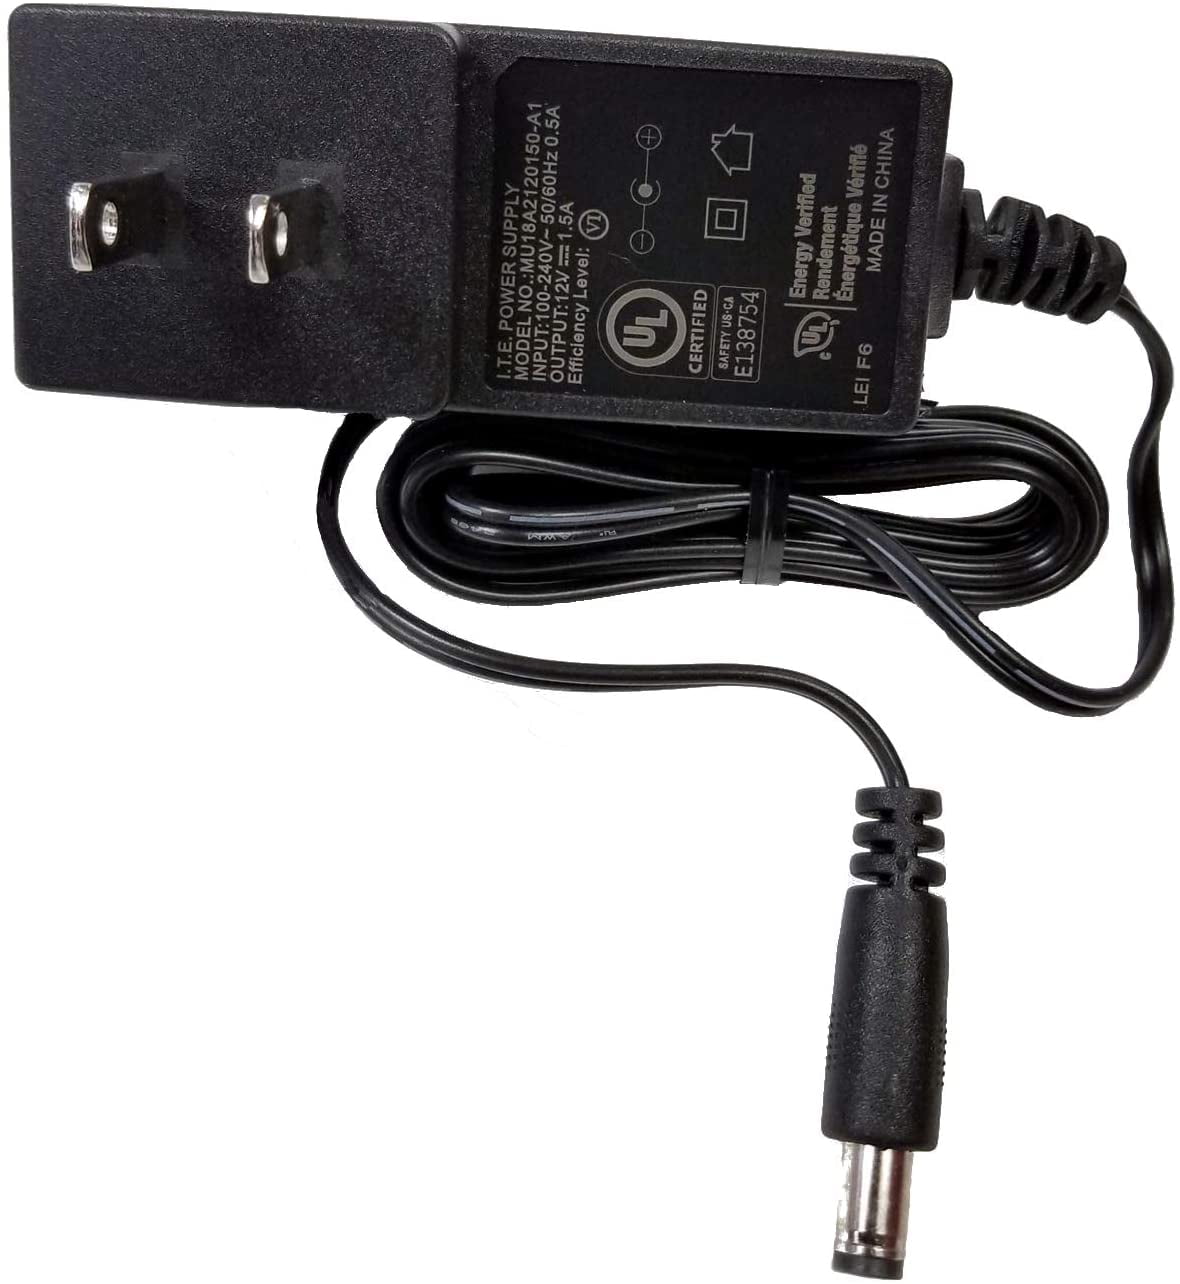 AC Adapter 12V 1.5A Switching Power Supply Adapter for 100V-240V AC 50/60Hz New 